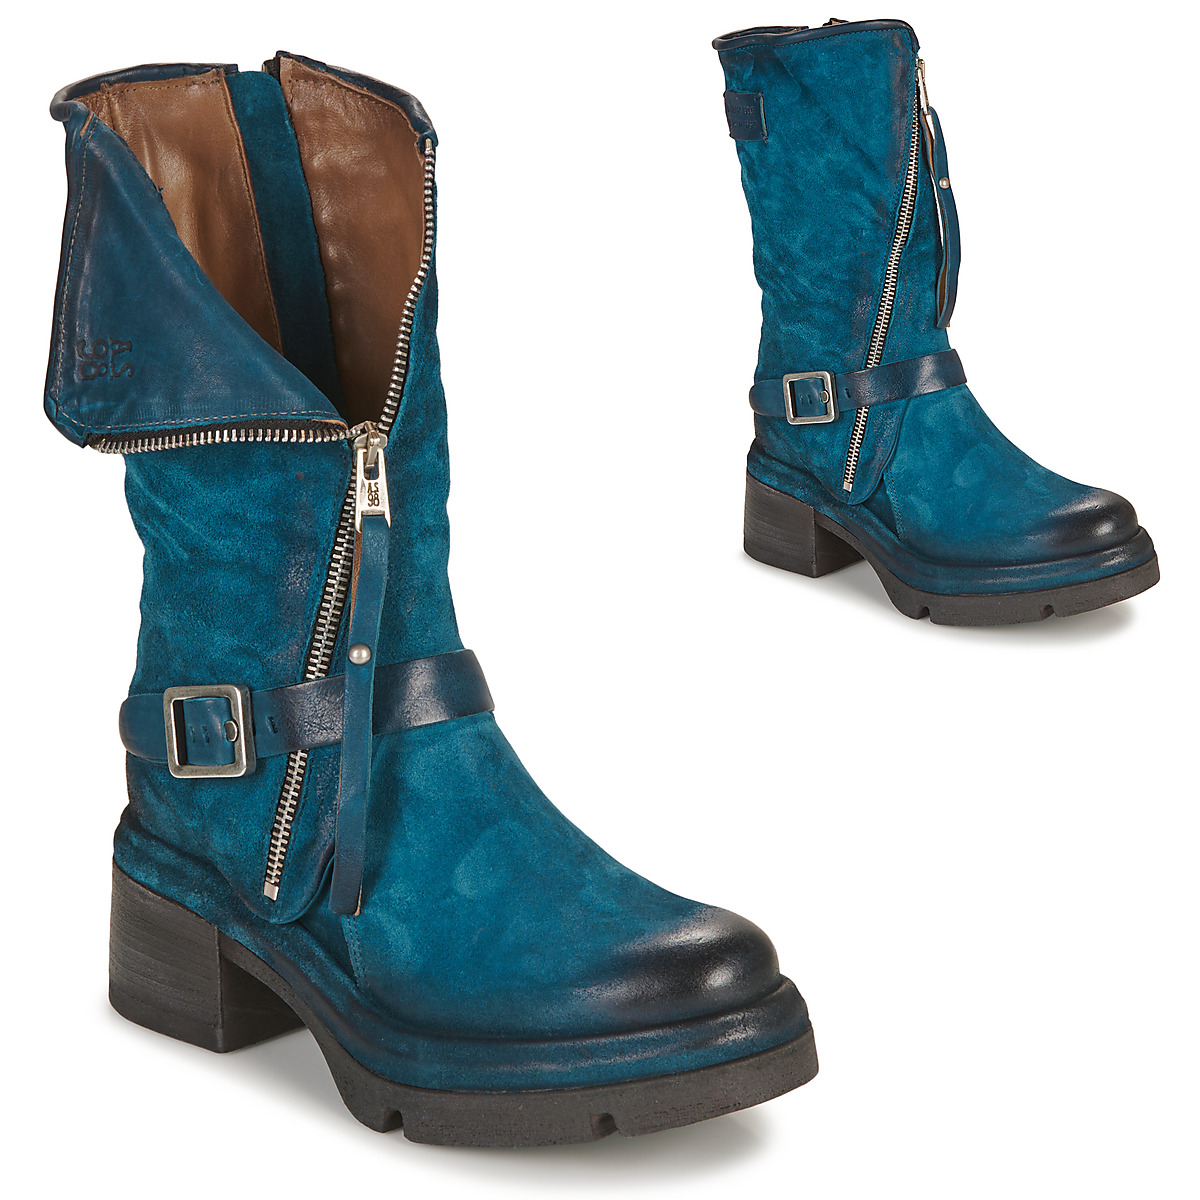 airstep / a.s.98  easy zip  women's mid boots in blue